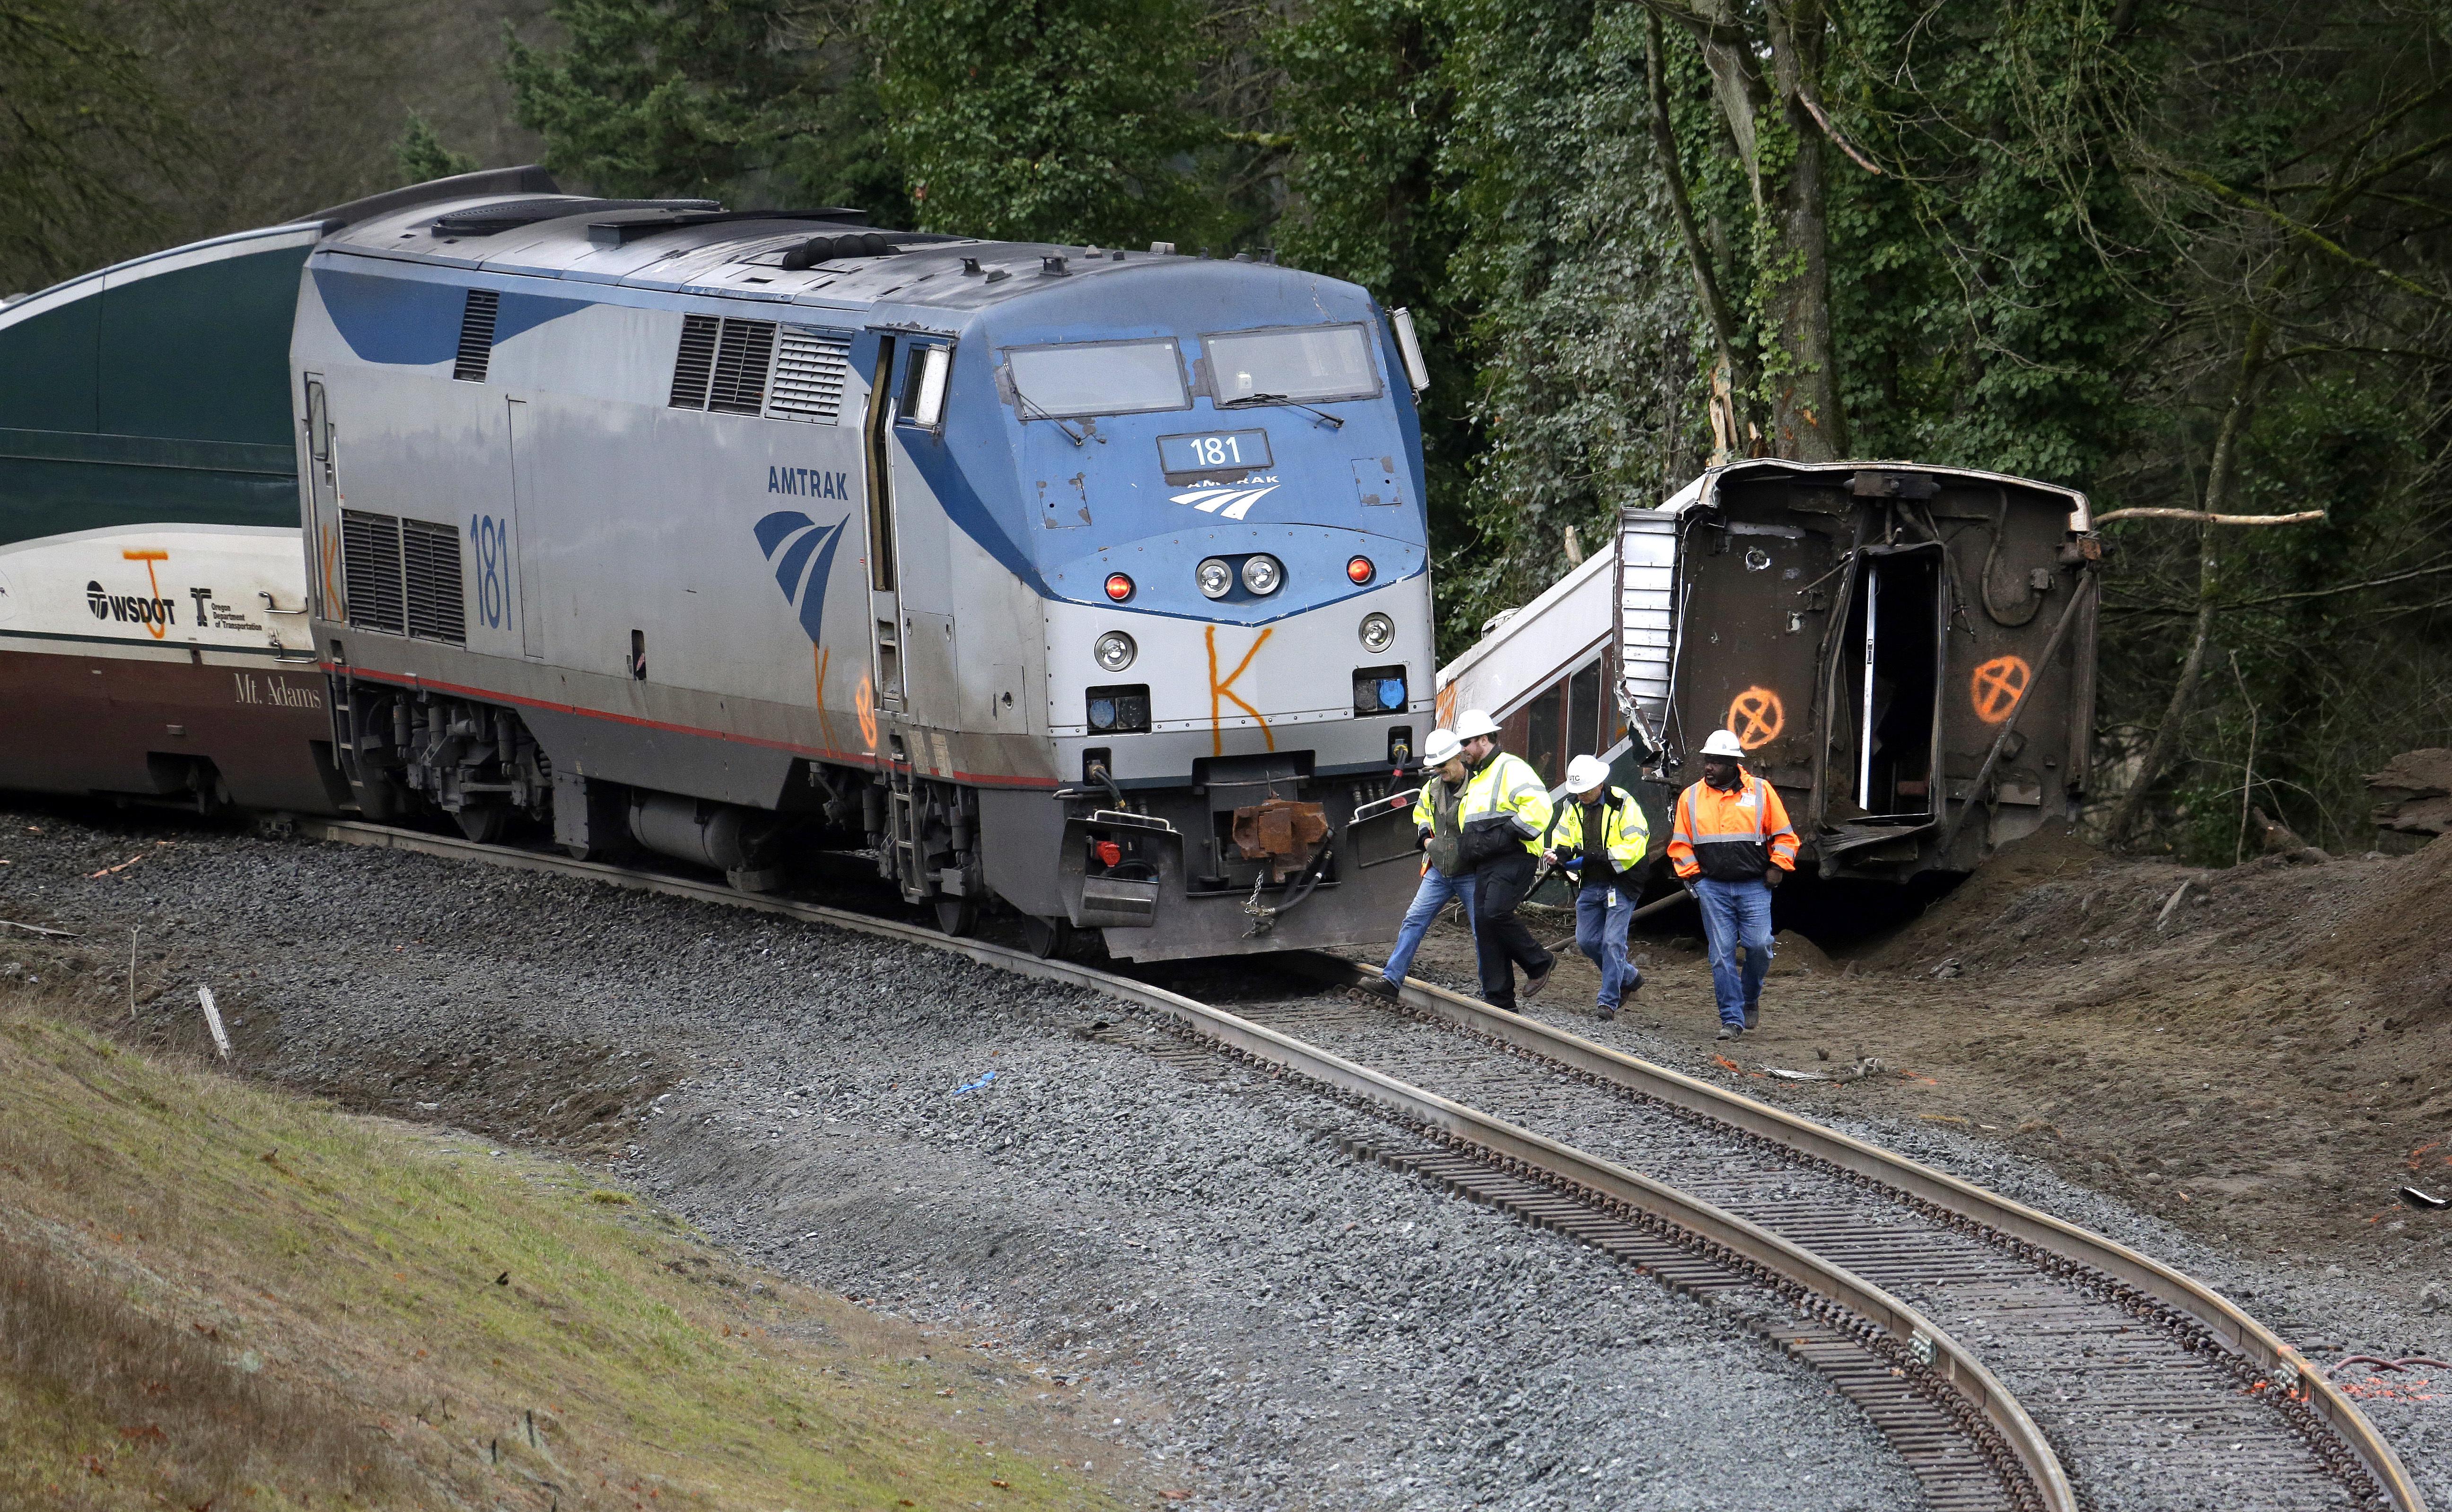 Amtrak train derailed on new, faster route that drew concern | The